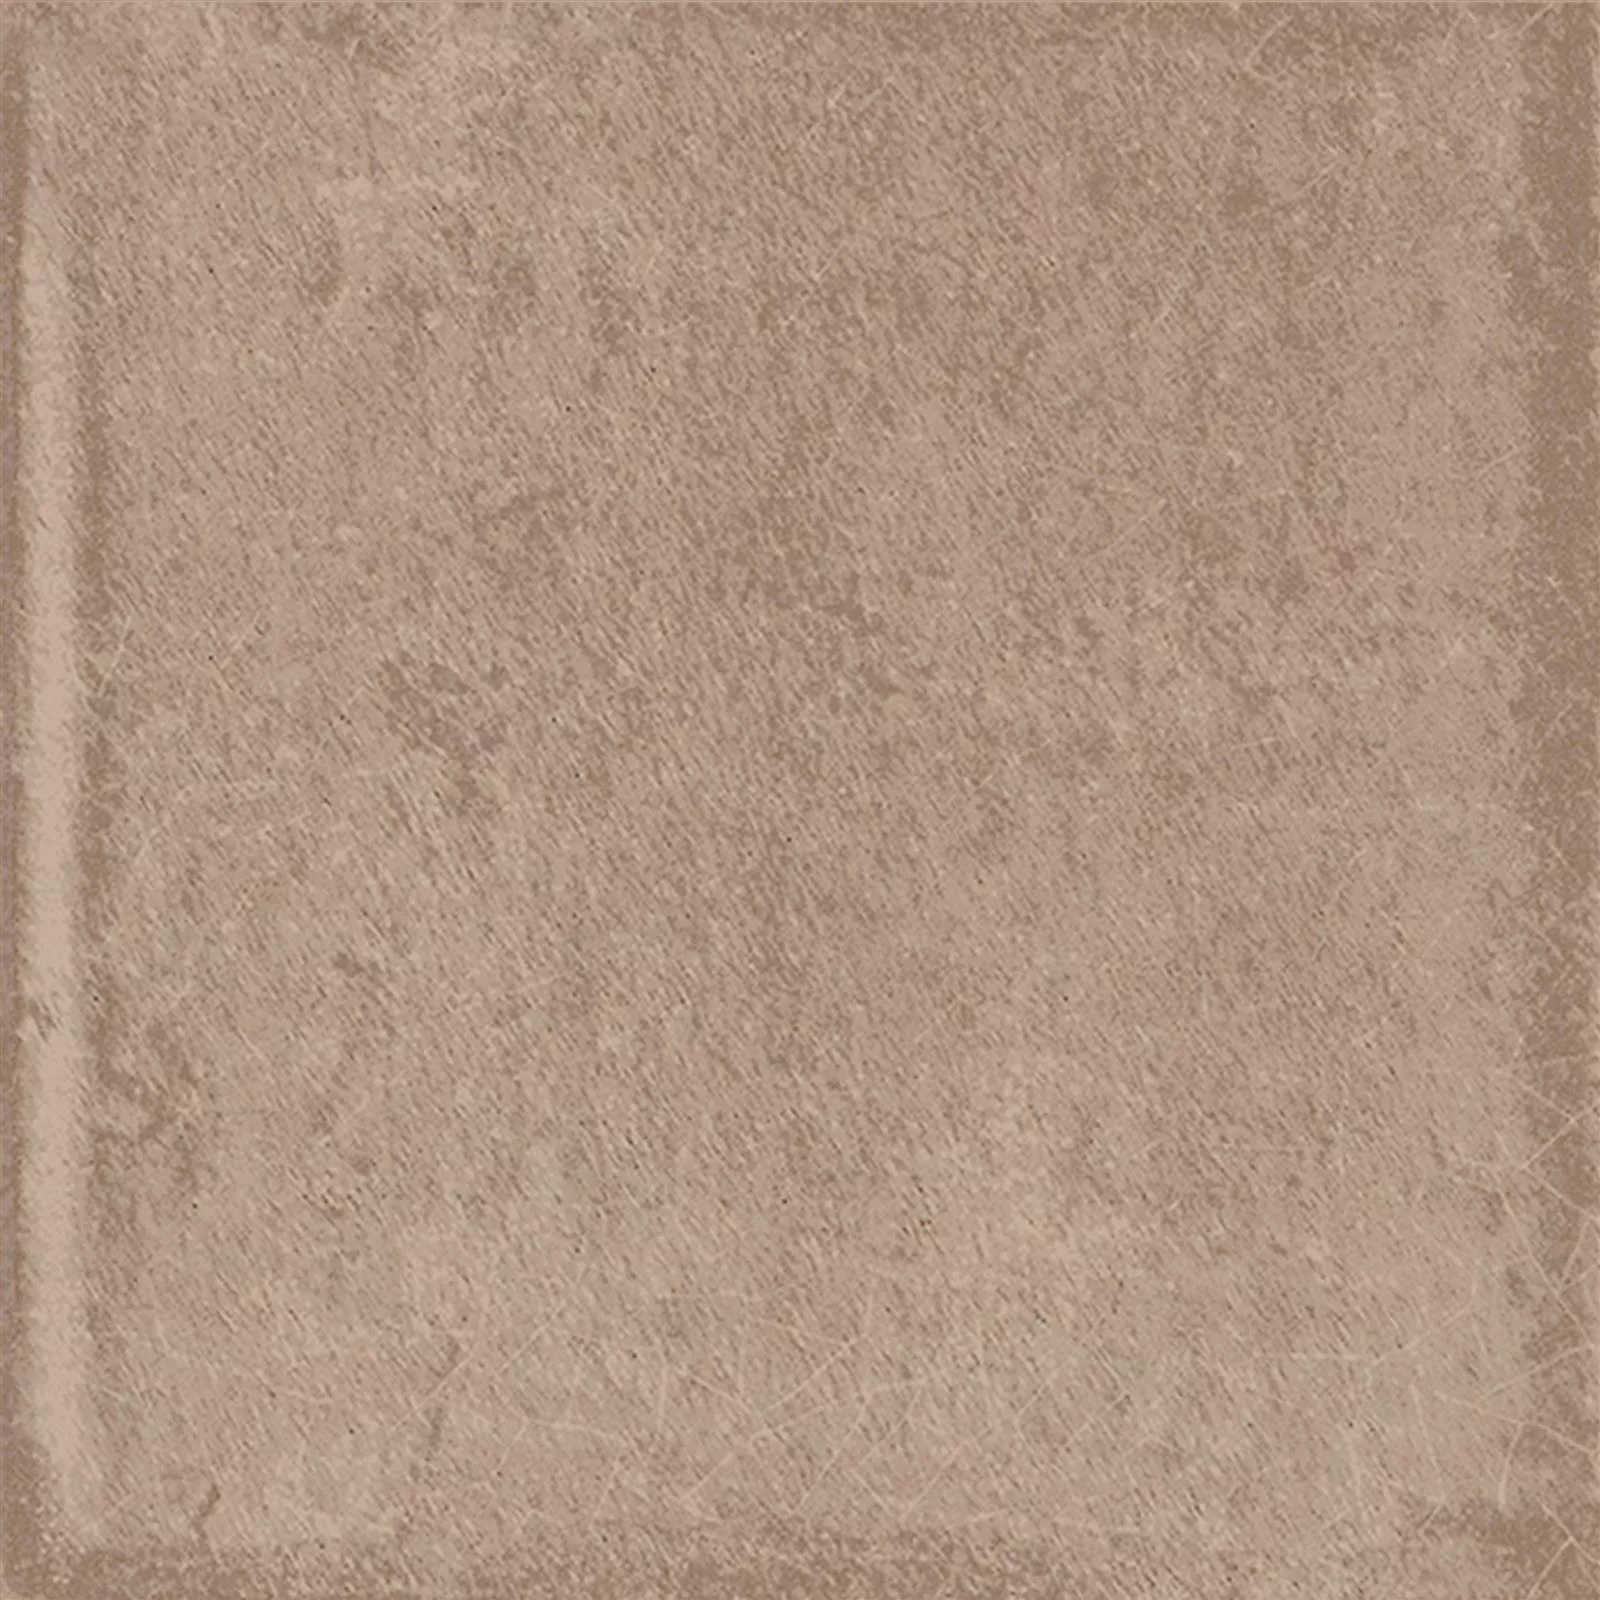 Sample Wall Tiles Maestro Waved Glossy Light Brown 15x15cm